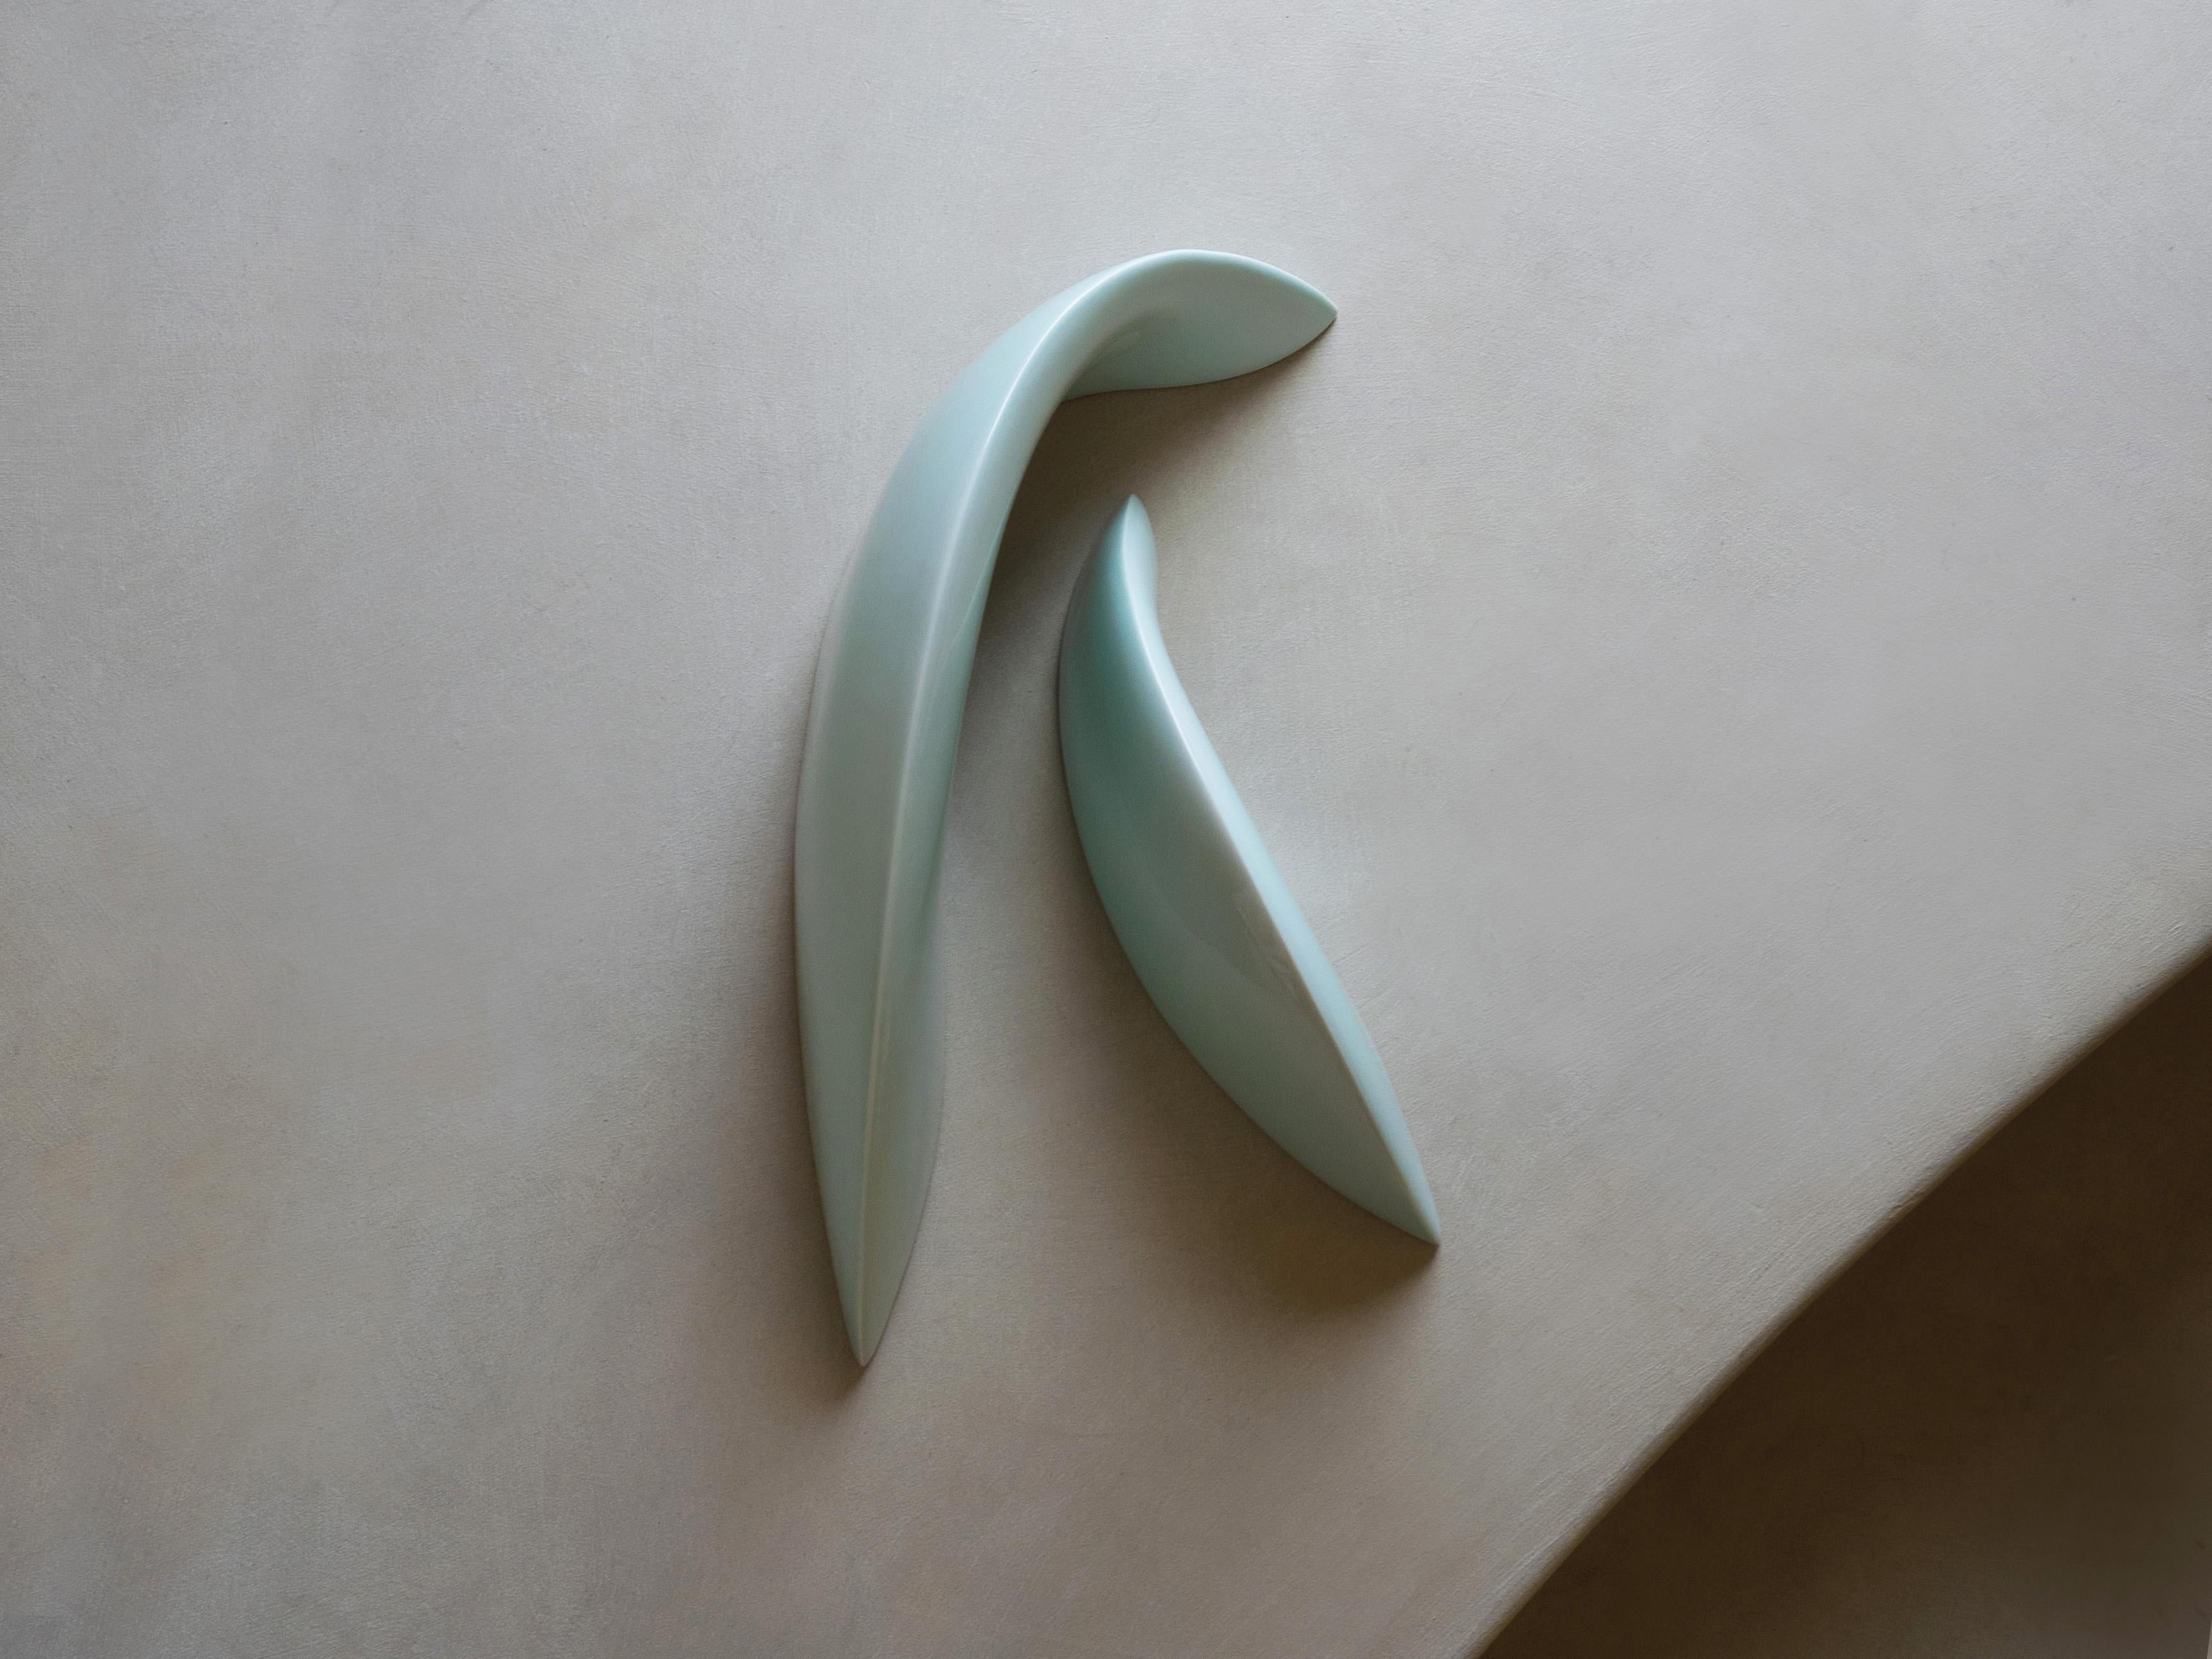 This is a ceramic celadon sculpture pair by Soo Joo, designed to be an abstract table sculpture. Reminiscent of two Isles, someone crossing their legs, 송편 (Korean dumplings), succulent leaves, a hug, or a mama and baby whale, these Korean celadon